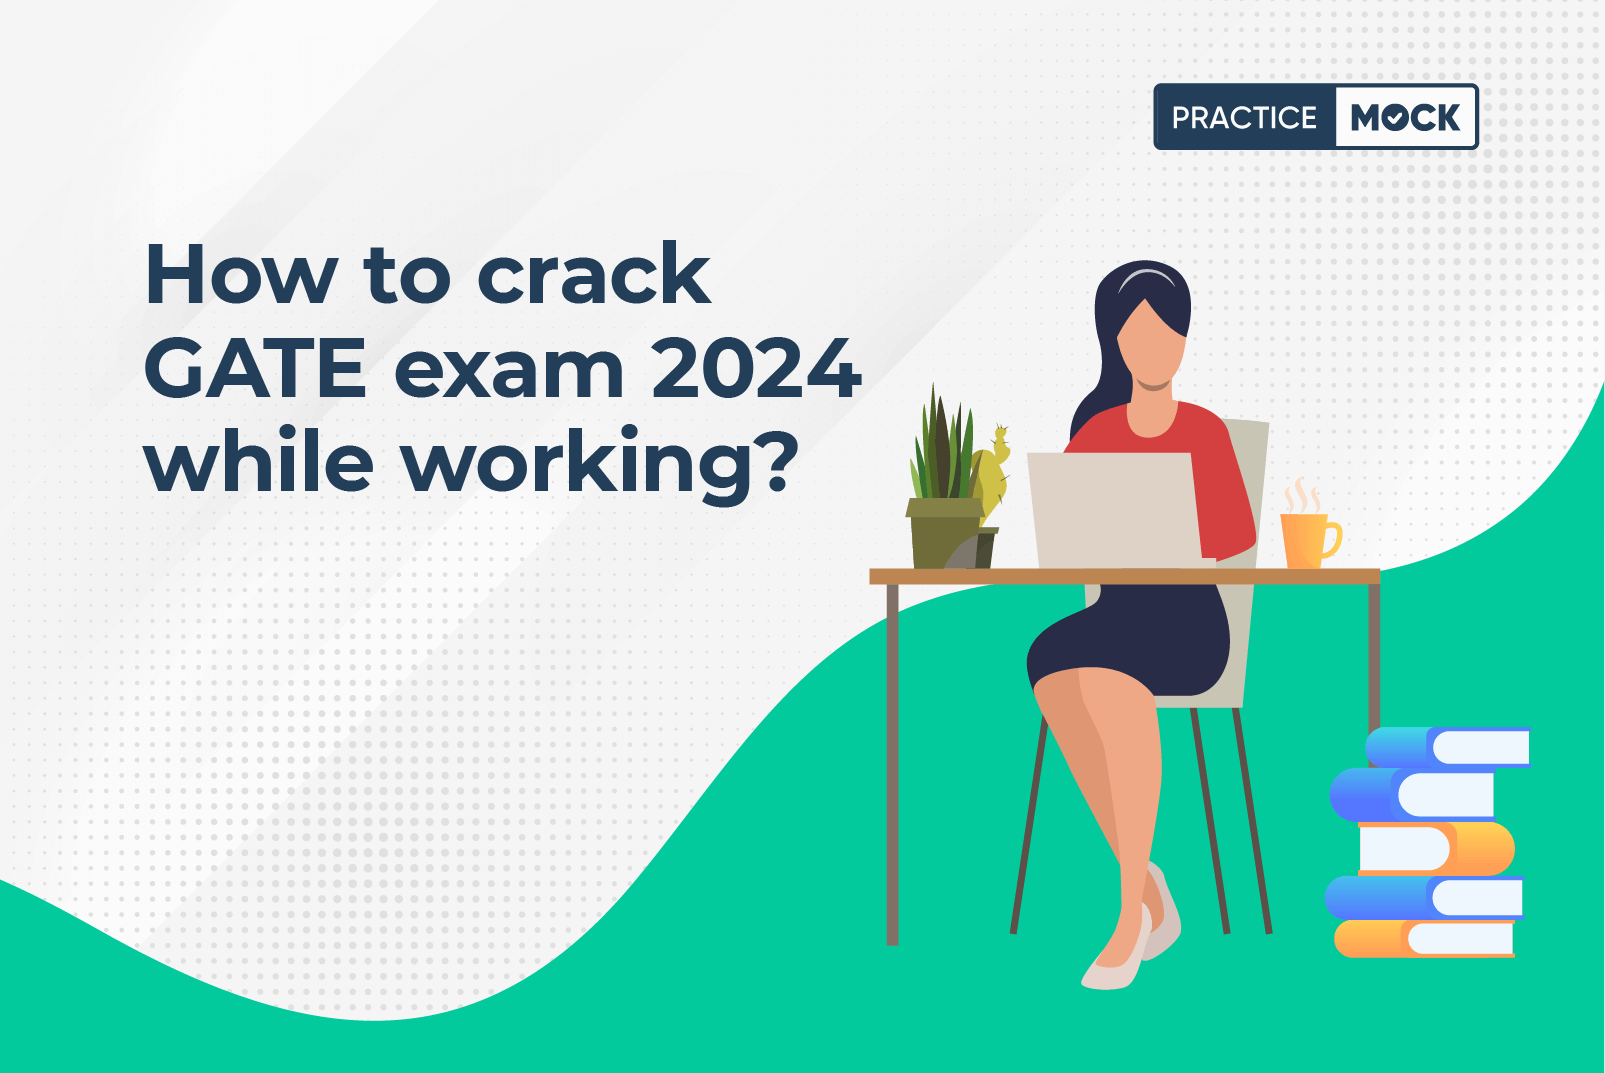 How to crack GATE exam 2024 while working